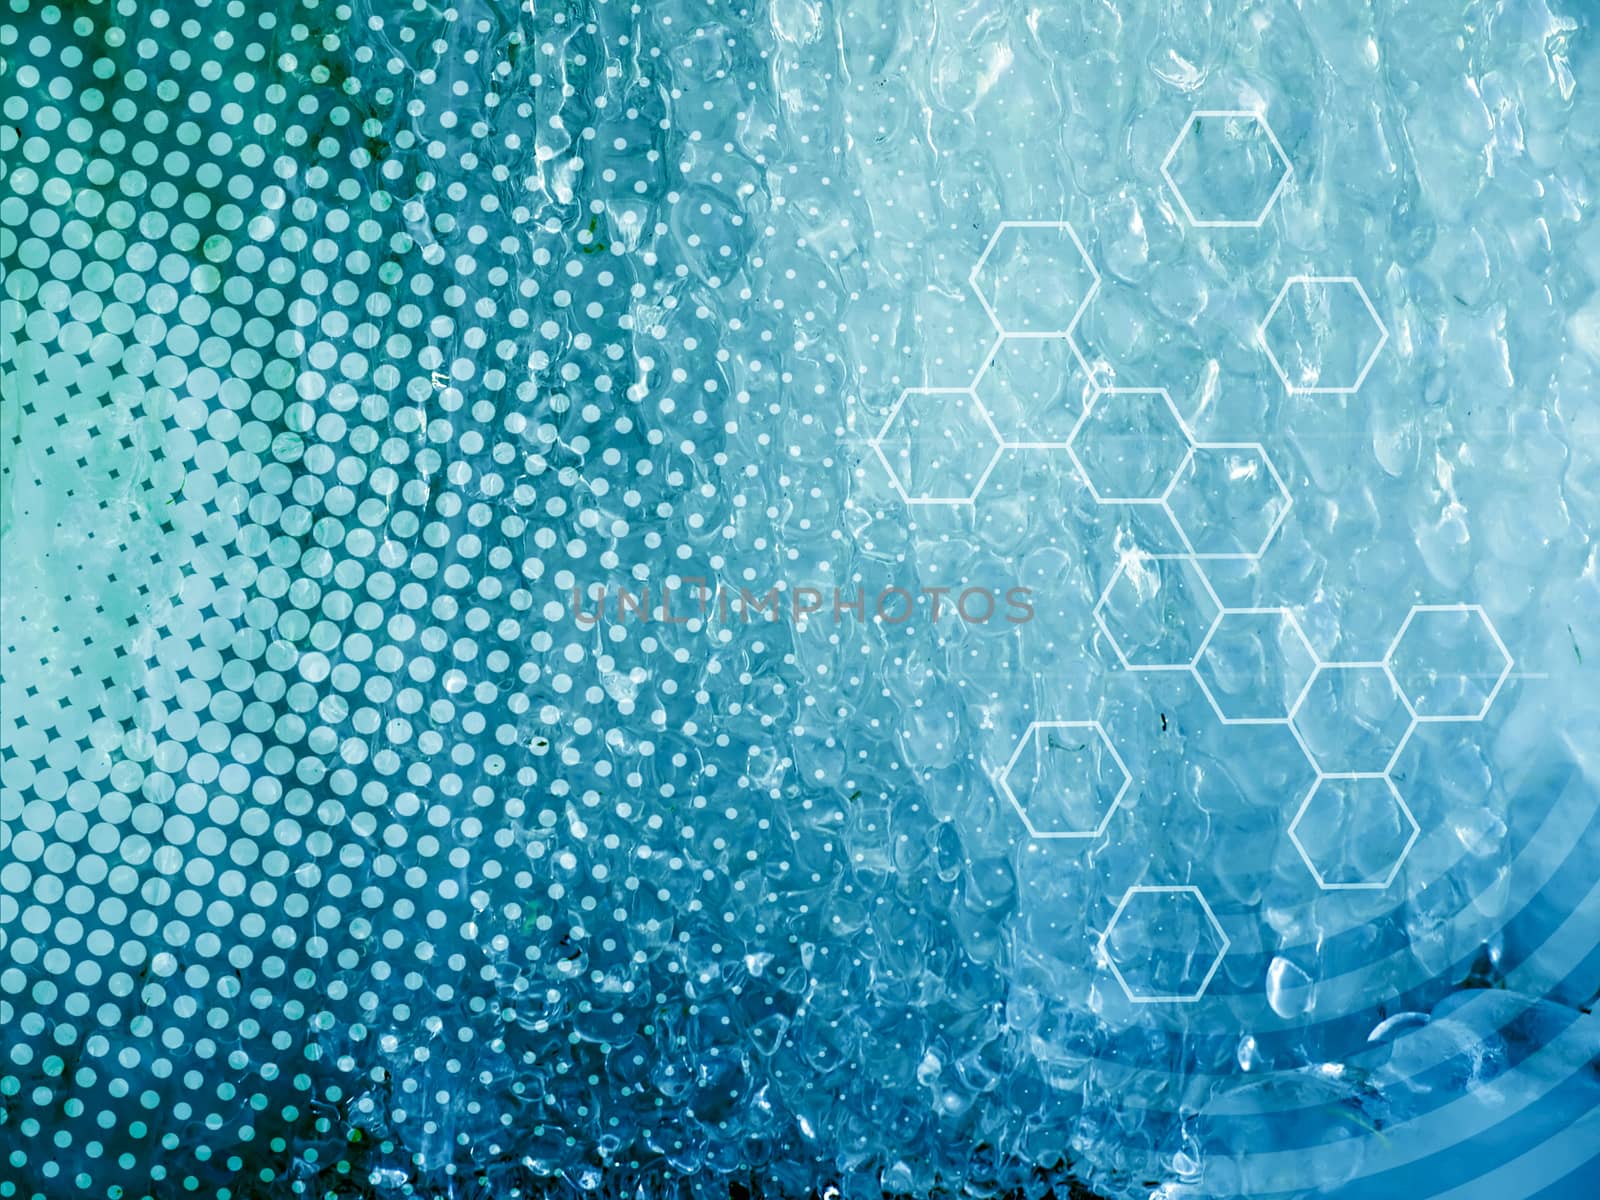 blue abstract background with hexagons and dots by sette